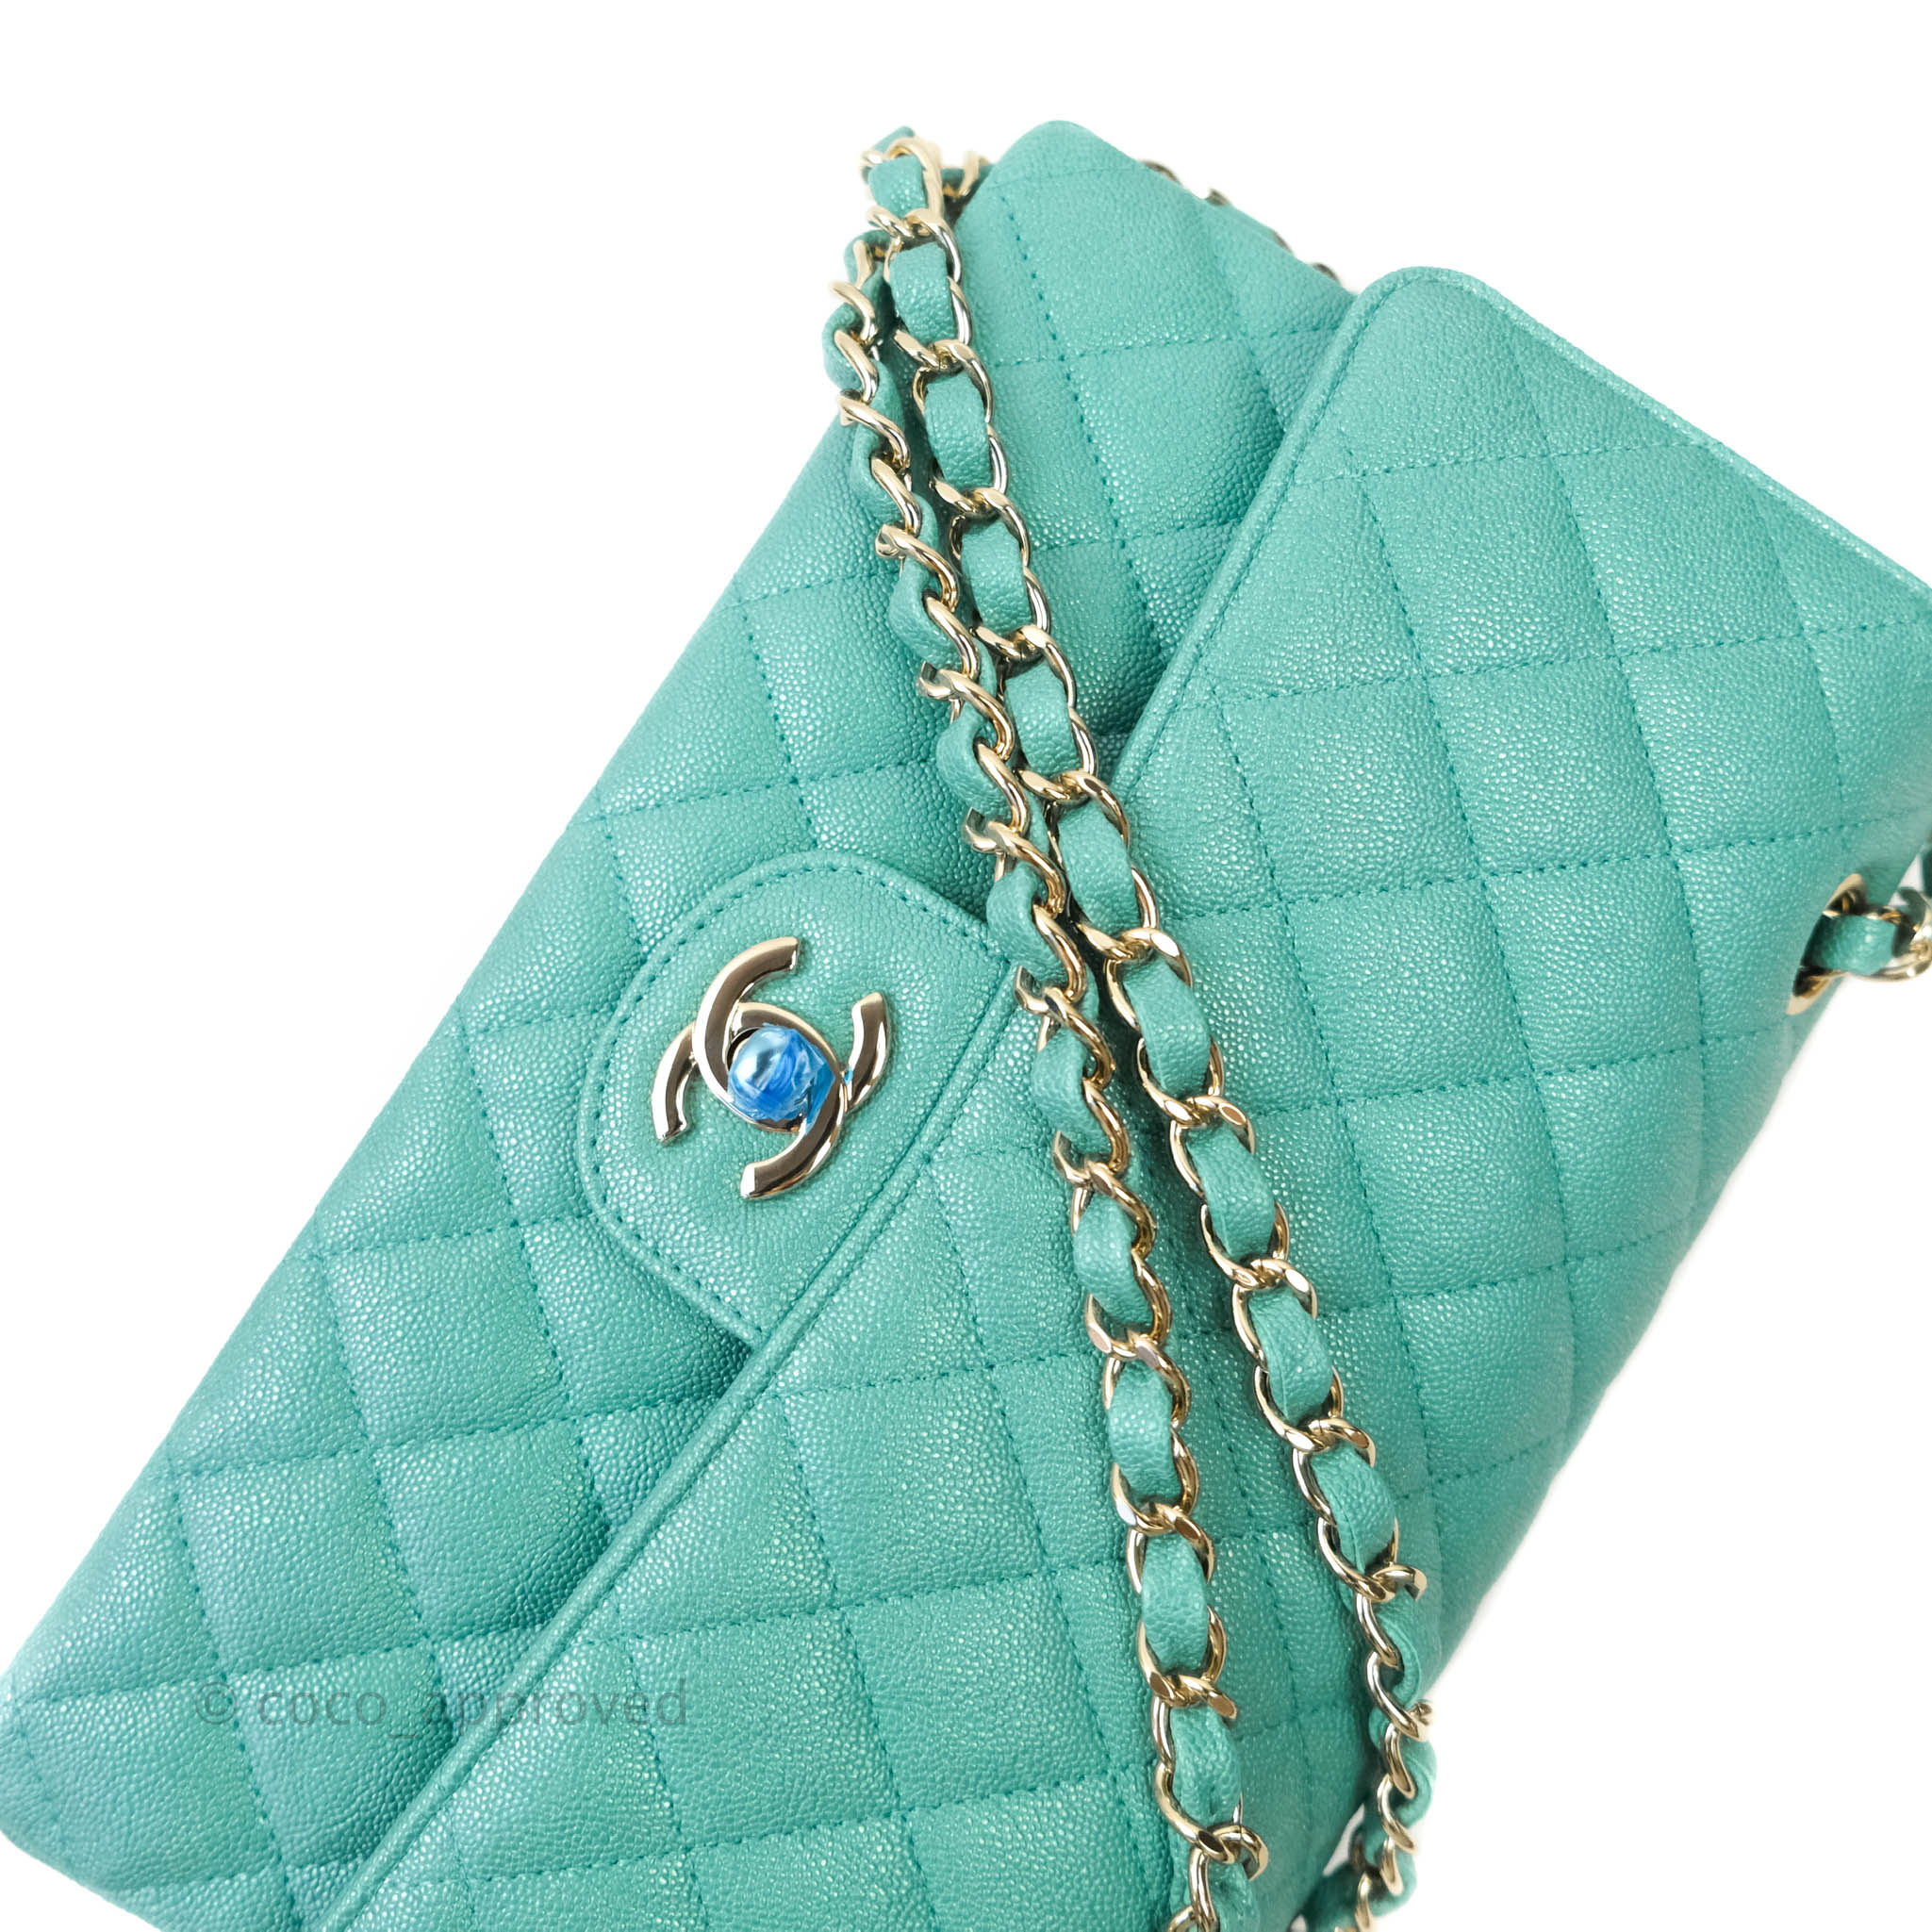 Caviar Quilted Medium Double Flap Light Blue – Trends Luxe